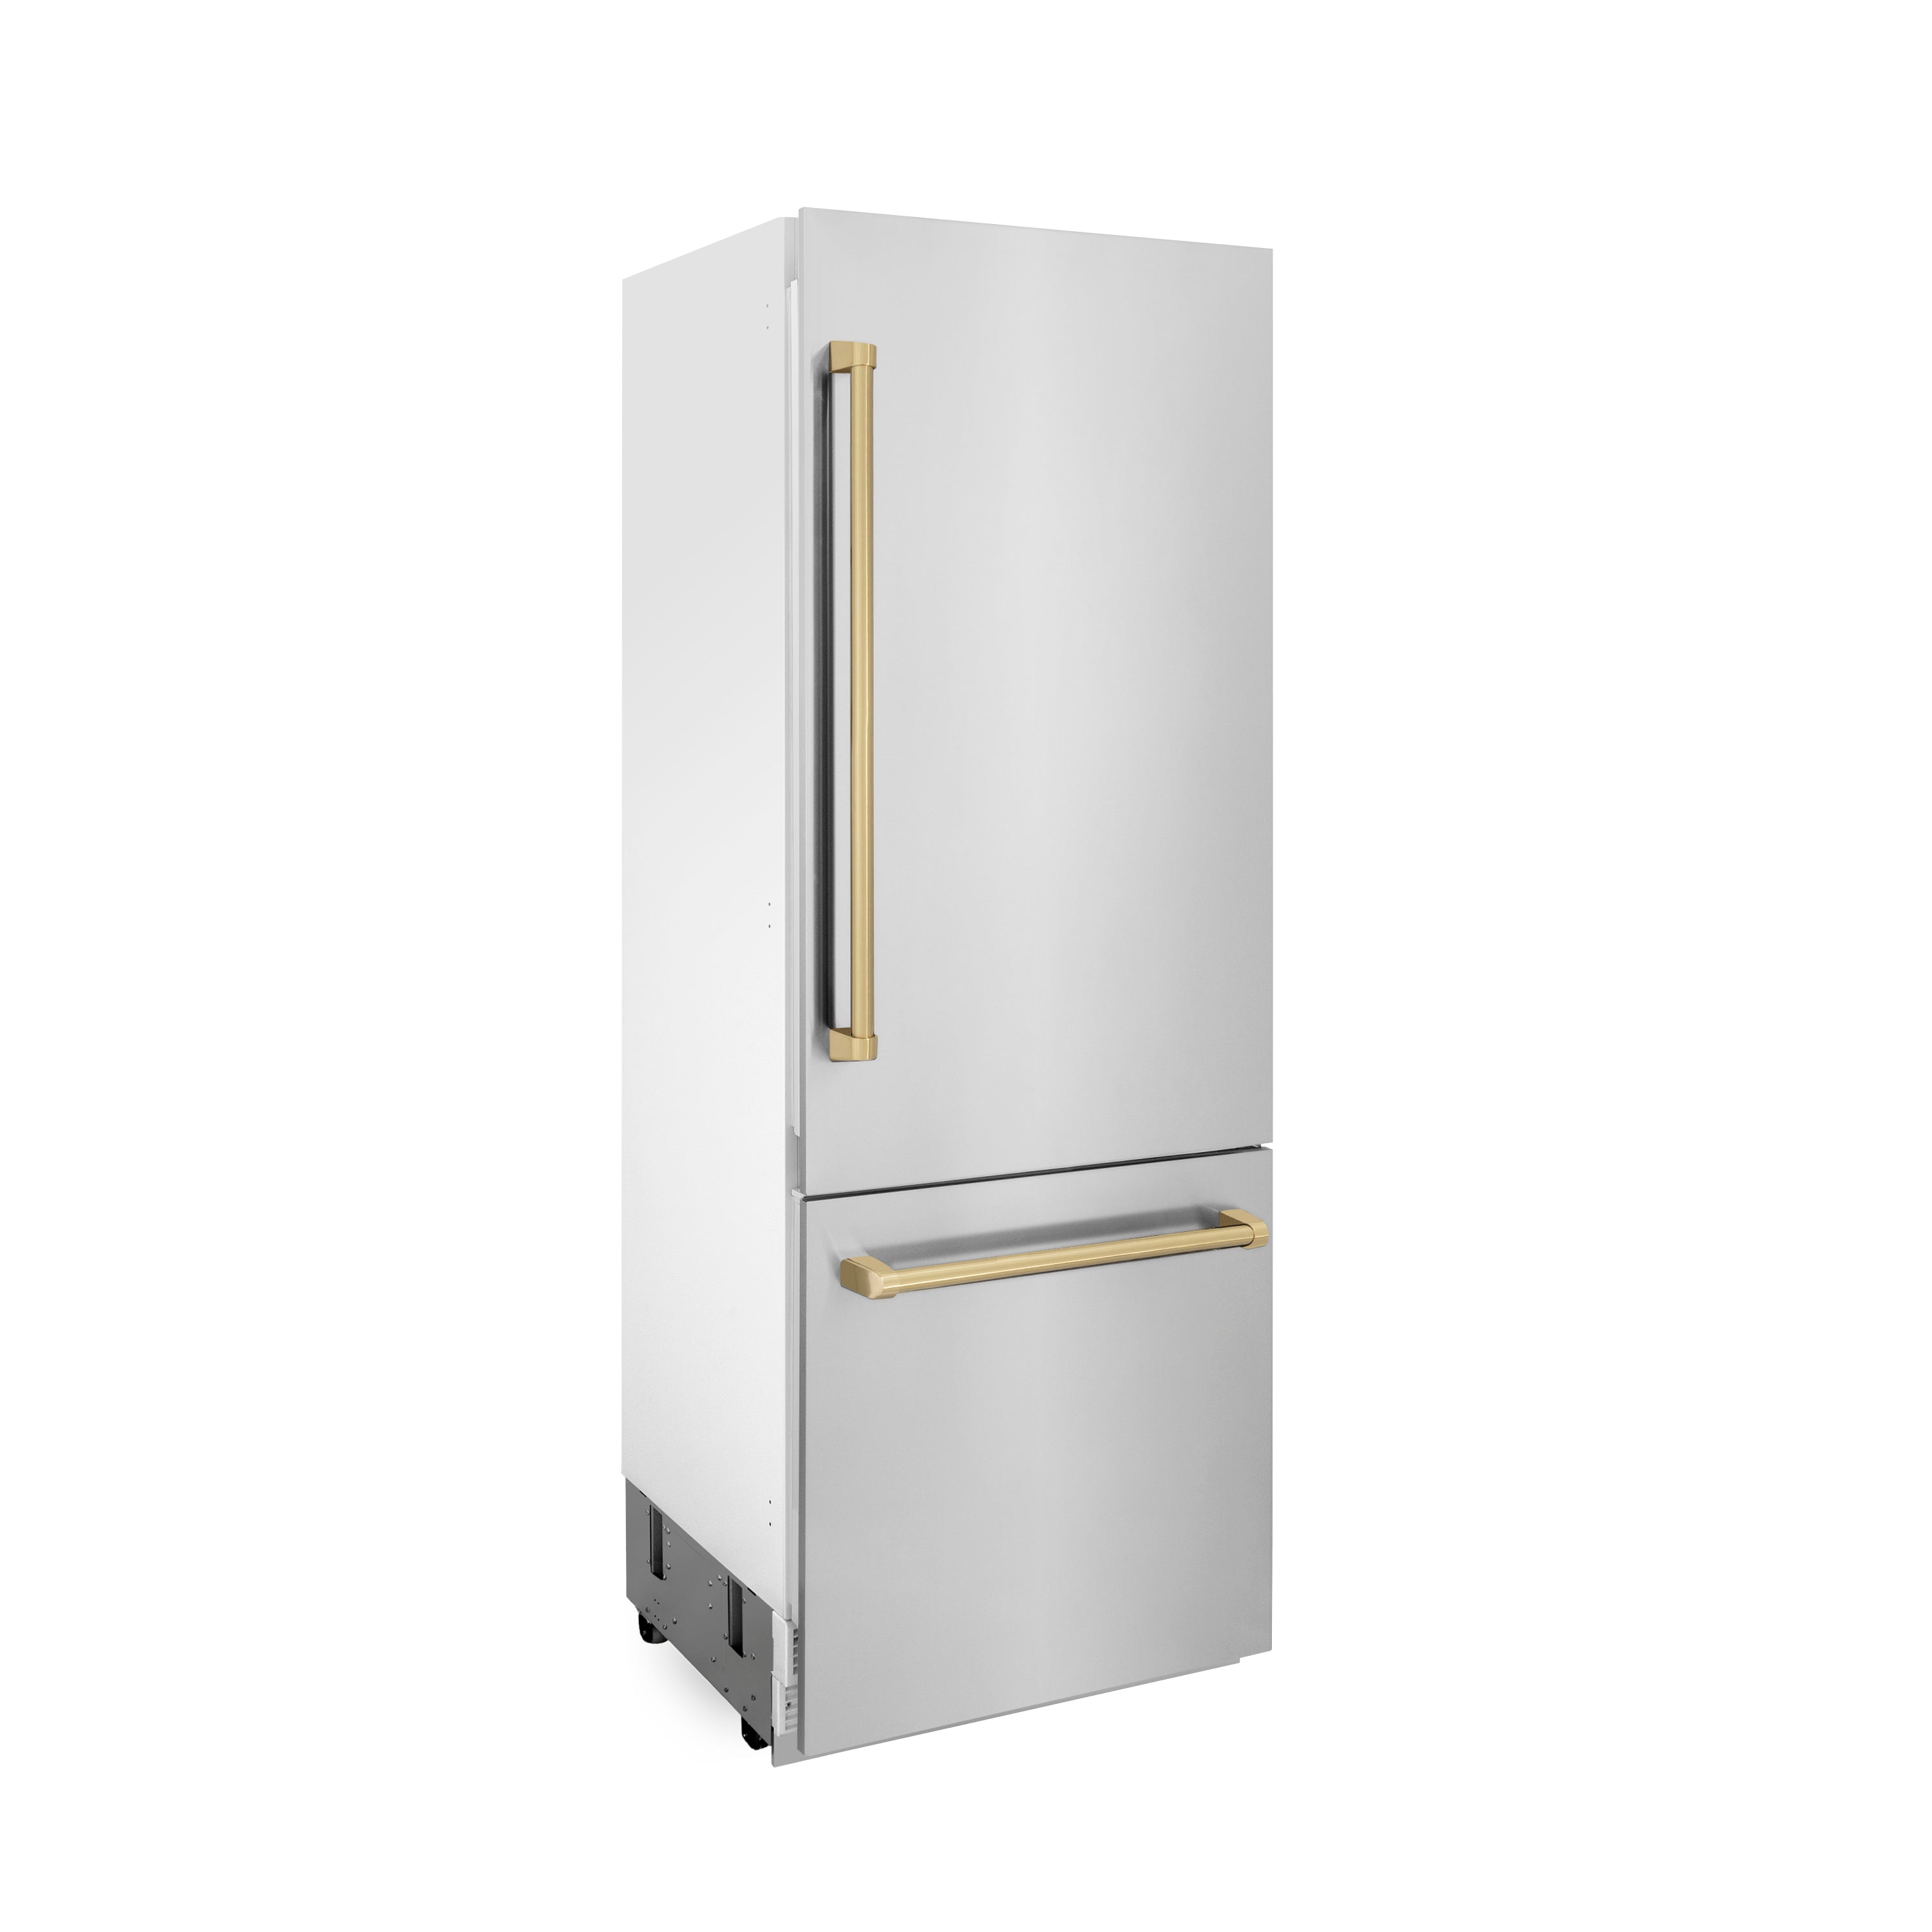 ZLINE 30” Autograph Edition 16.1 cu. ft. Built-in 2-Door Bottom Freezer Refrigerator with Internal Water and Ice Dispenser in Stainless Steel with Champagne Bronze Accents